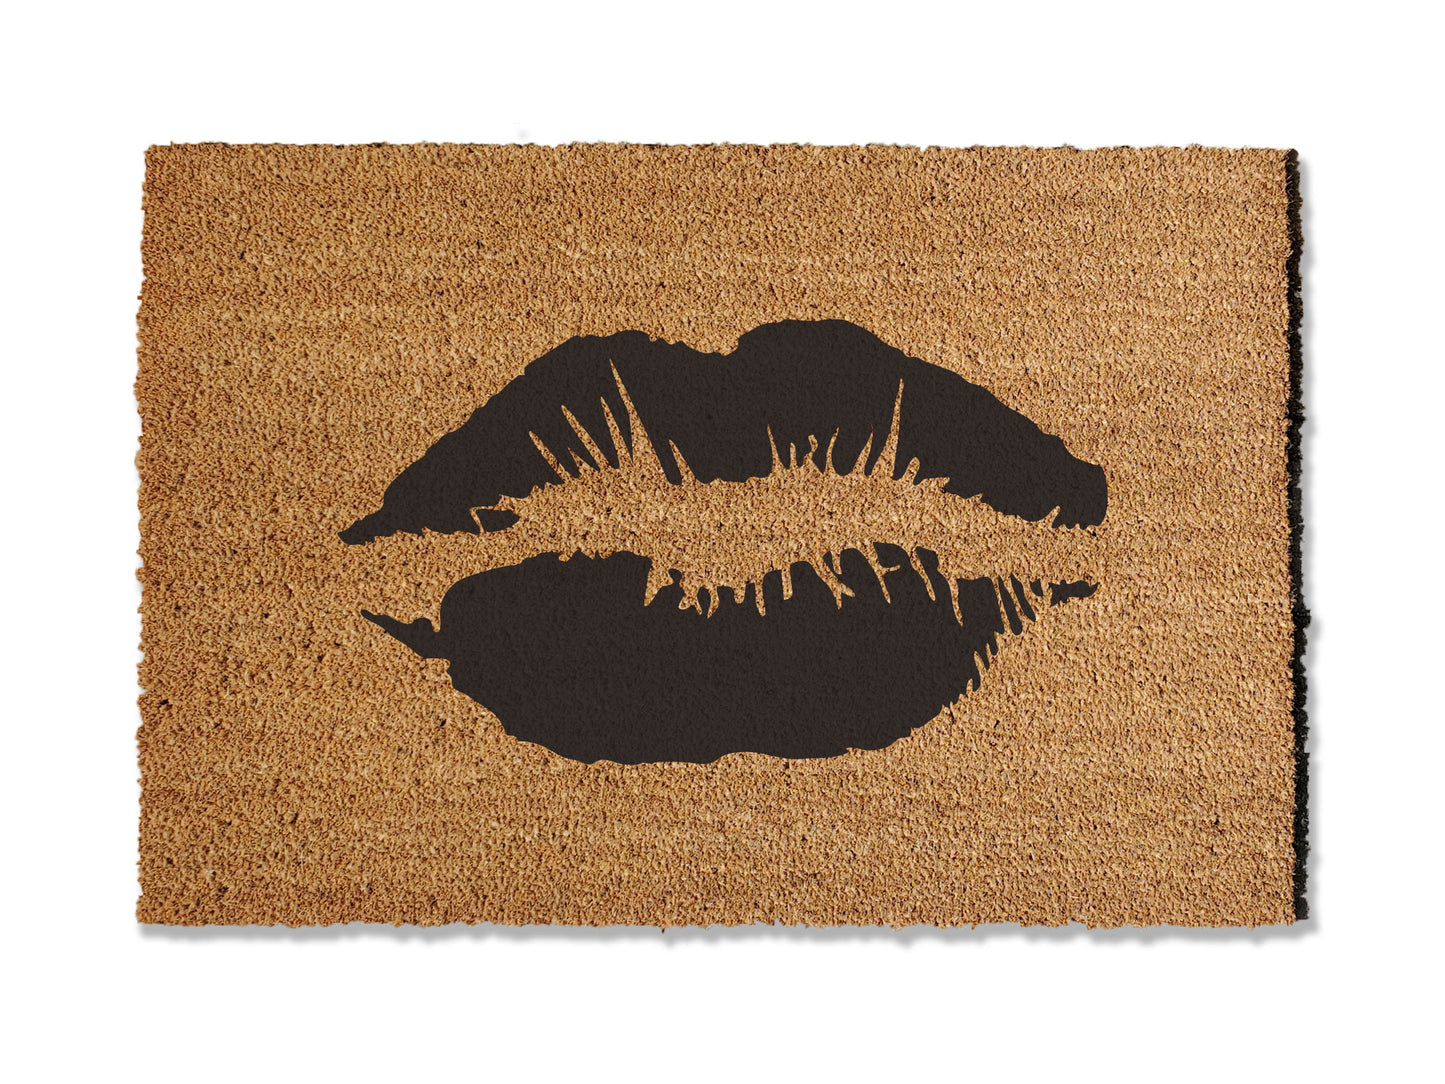 Make a chic statement with our coir doormat featuring a playful lipstick smooch. Available in multiple colors and sizes, this trendy mat adds a touch of glamour to your doorstep. Beyond style, it excels at trapping dirt, making it a functional and fashionable addition to your entryway.